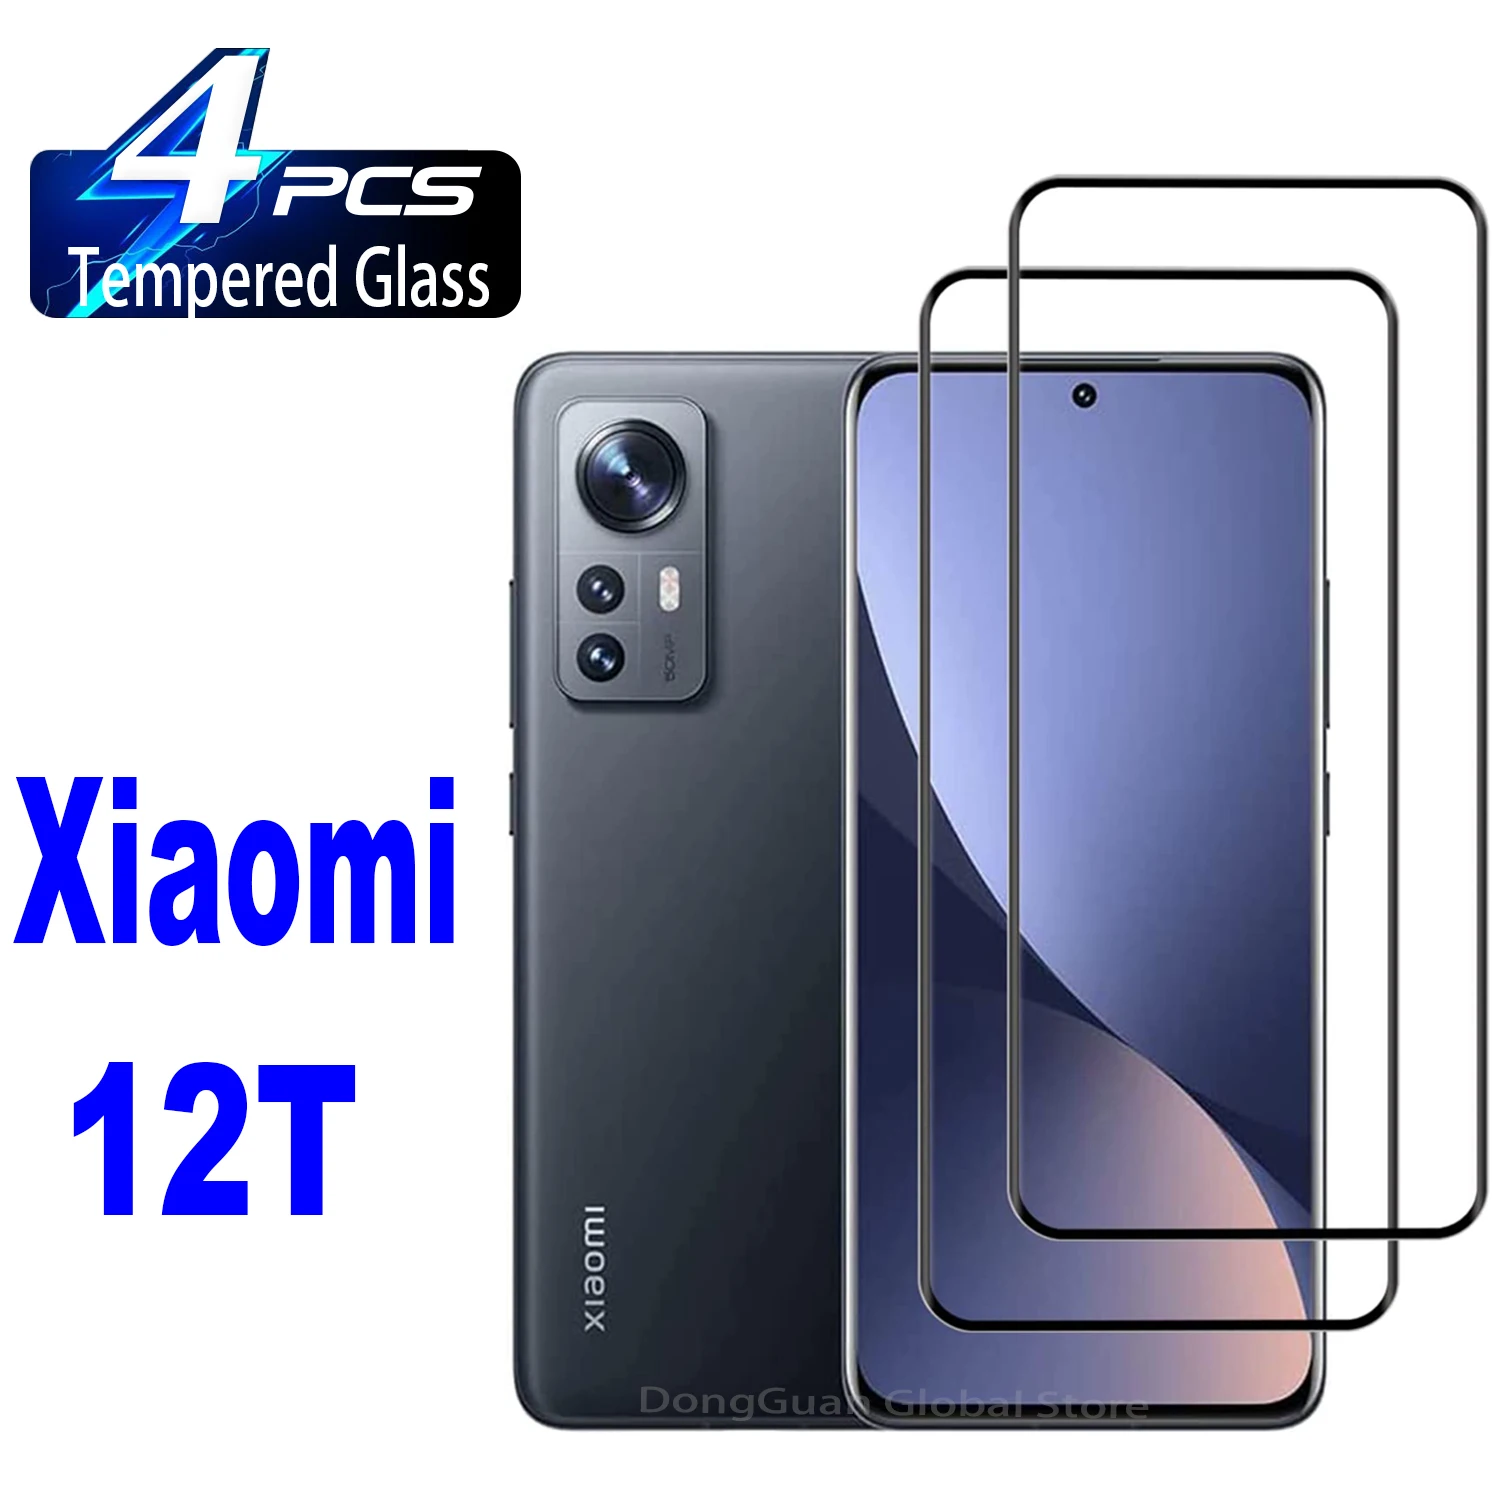 2/4Pcs Tempered Glass For Xiaomi 12T Pro Screen Protector Glass Film hd for xiaomi black shark 4 3 3s pro tempered glass screen protector on xiaomi blackshark 2 pro helo protective glass film 9h